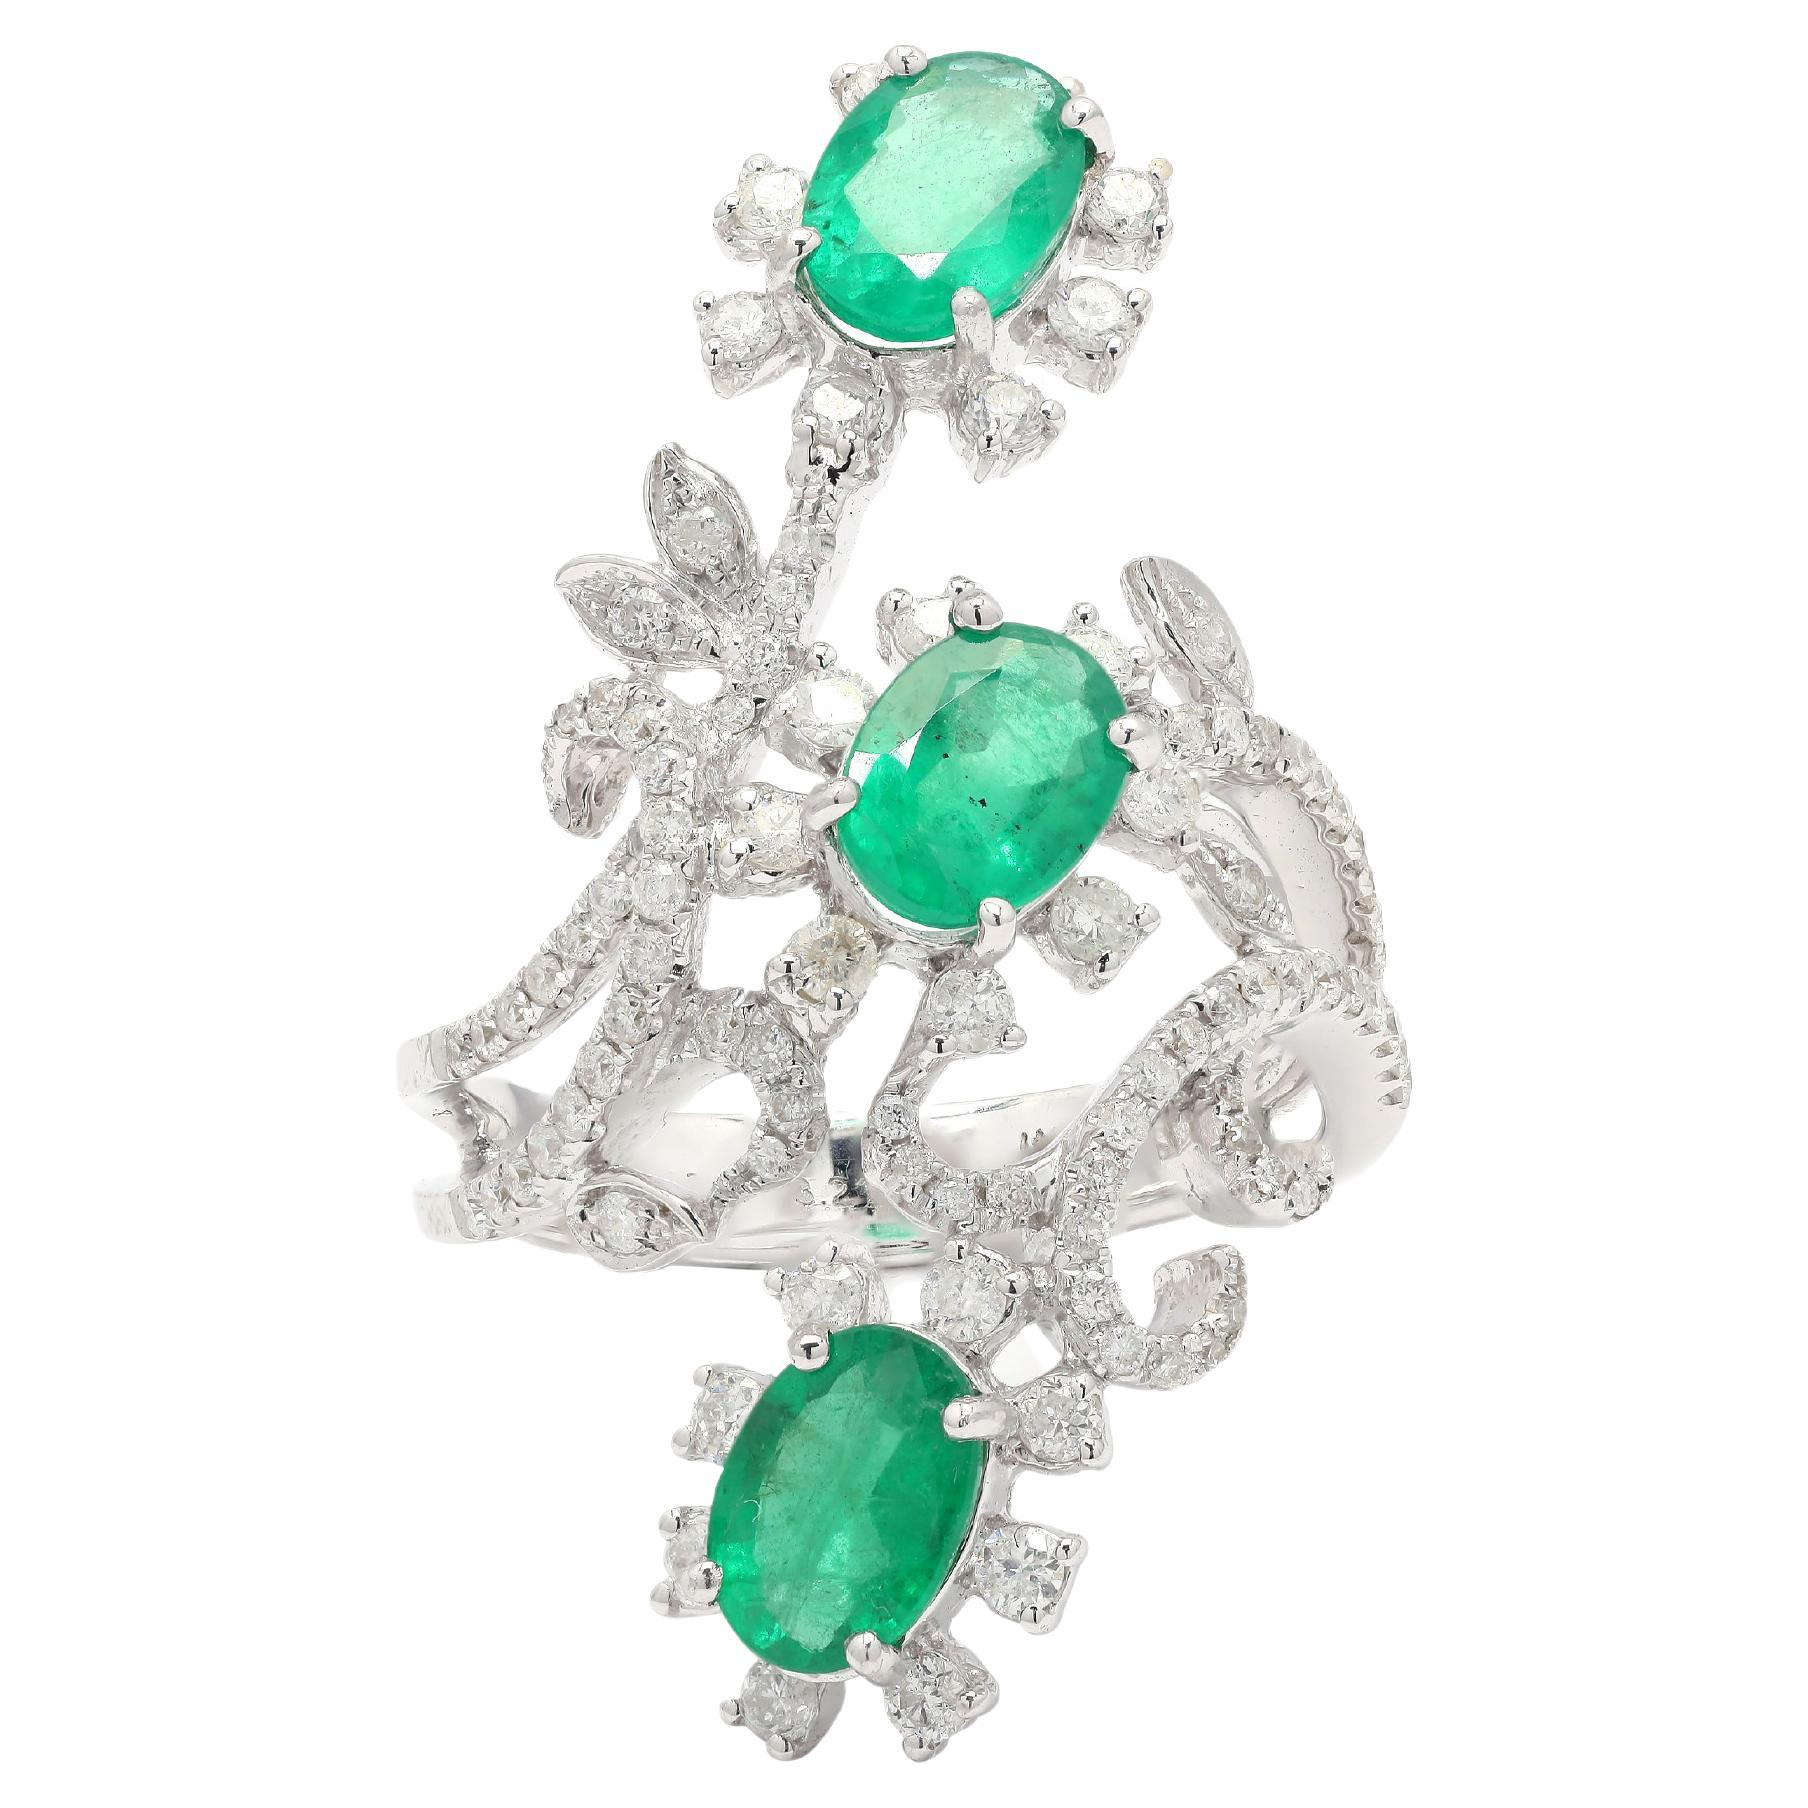 For Sale:  14K White Gold Three Stone Emerald and Diamond Cocktail Ring